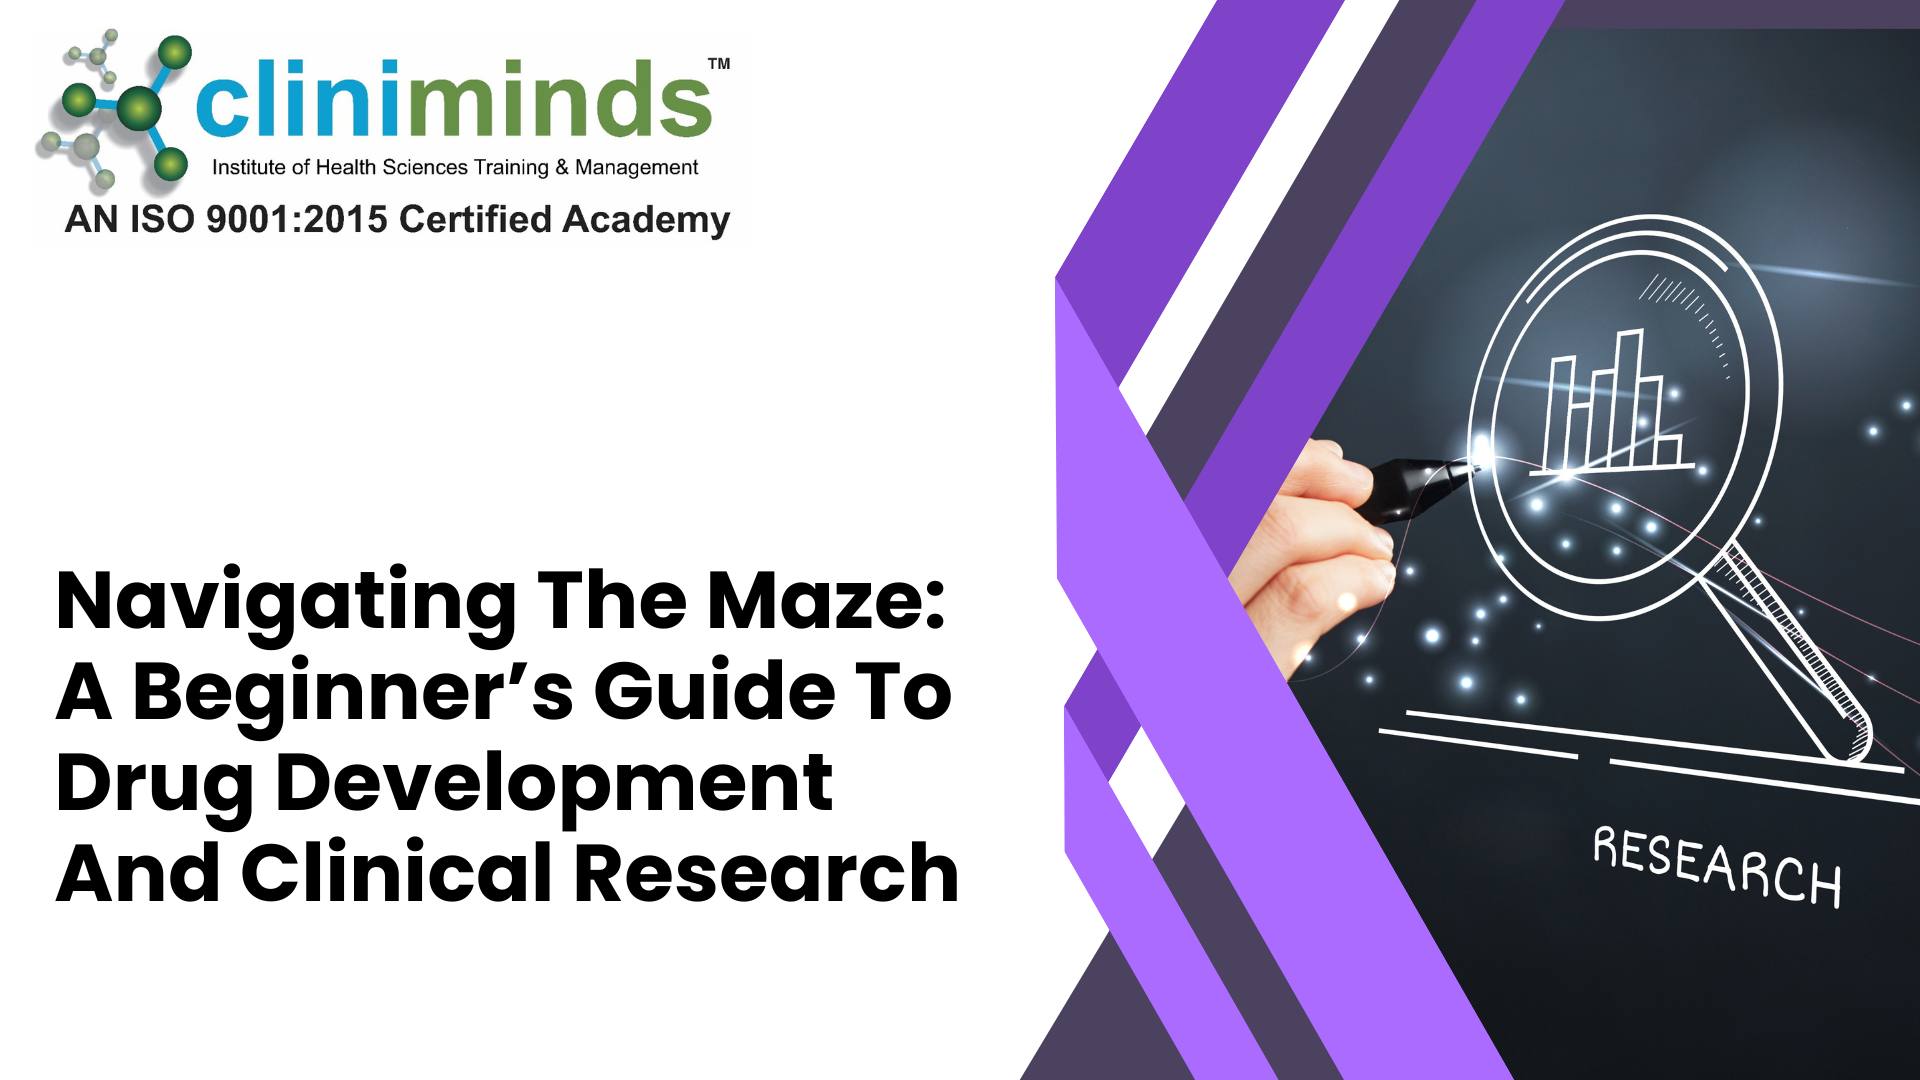 Navigating the Maze: A Beginner’s Guide to Drug Development and Clinical Research